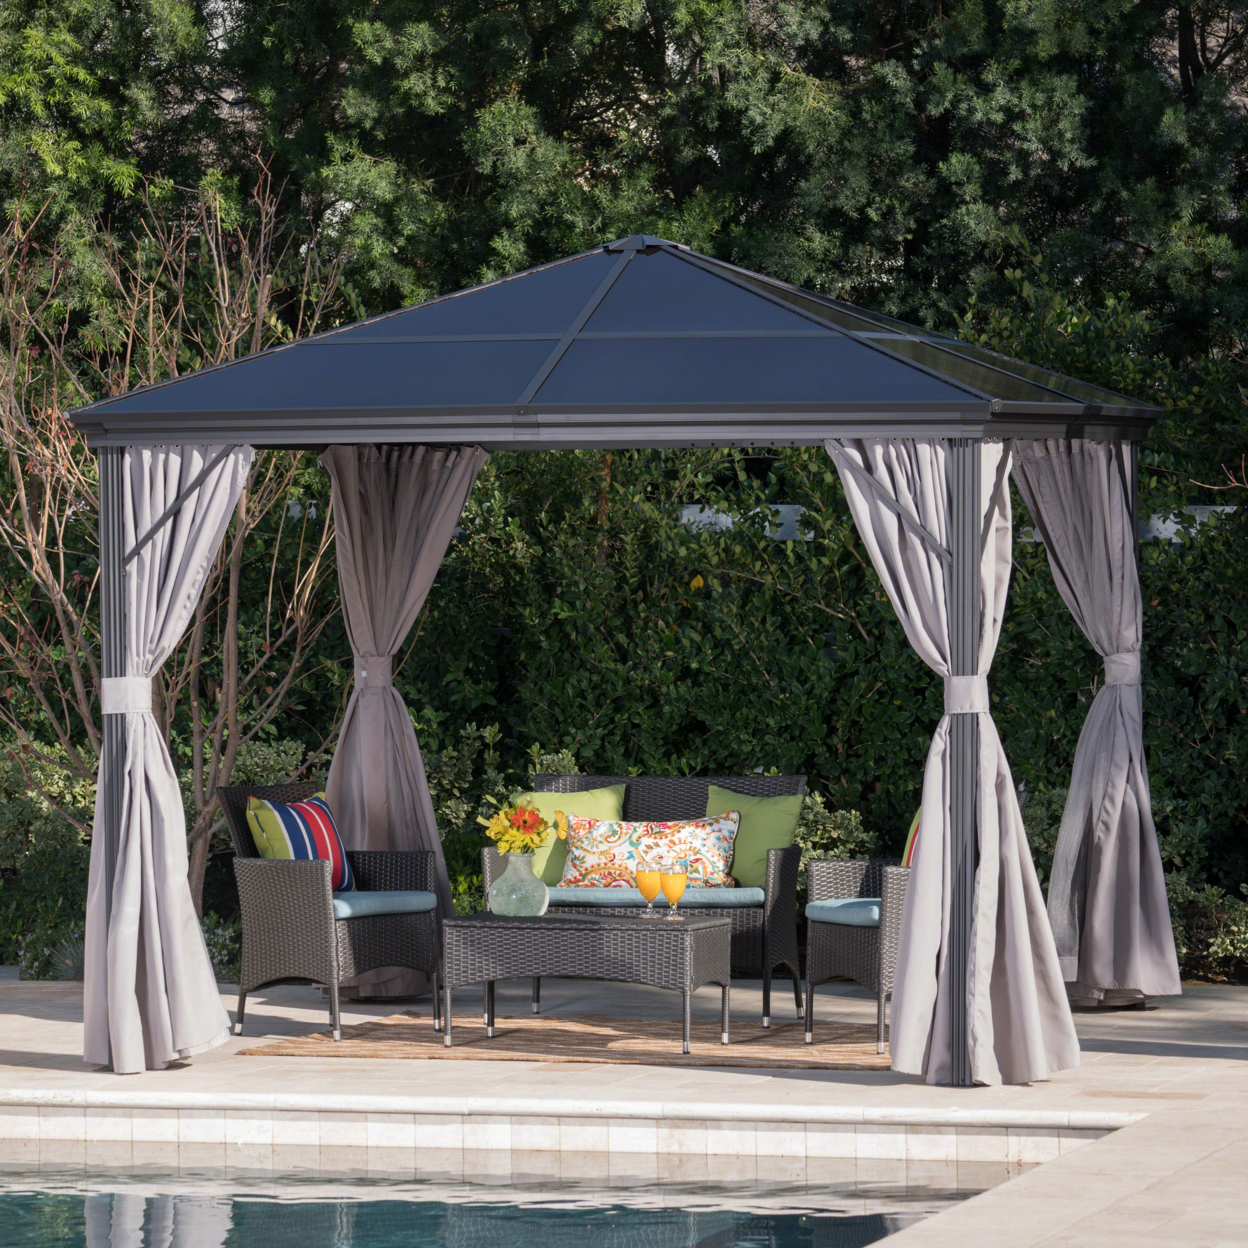 Bali Outdoor 10 X 10 Foot Rust Proof Aluminum Framed Hardtop Gazebo With Curtains - Brown/Black